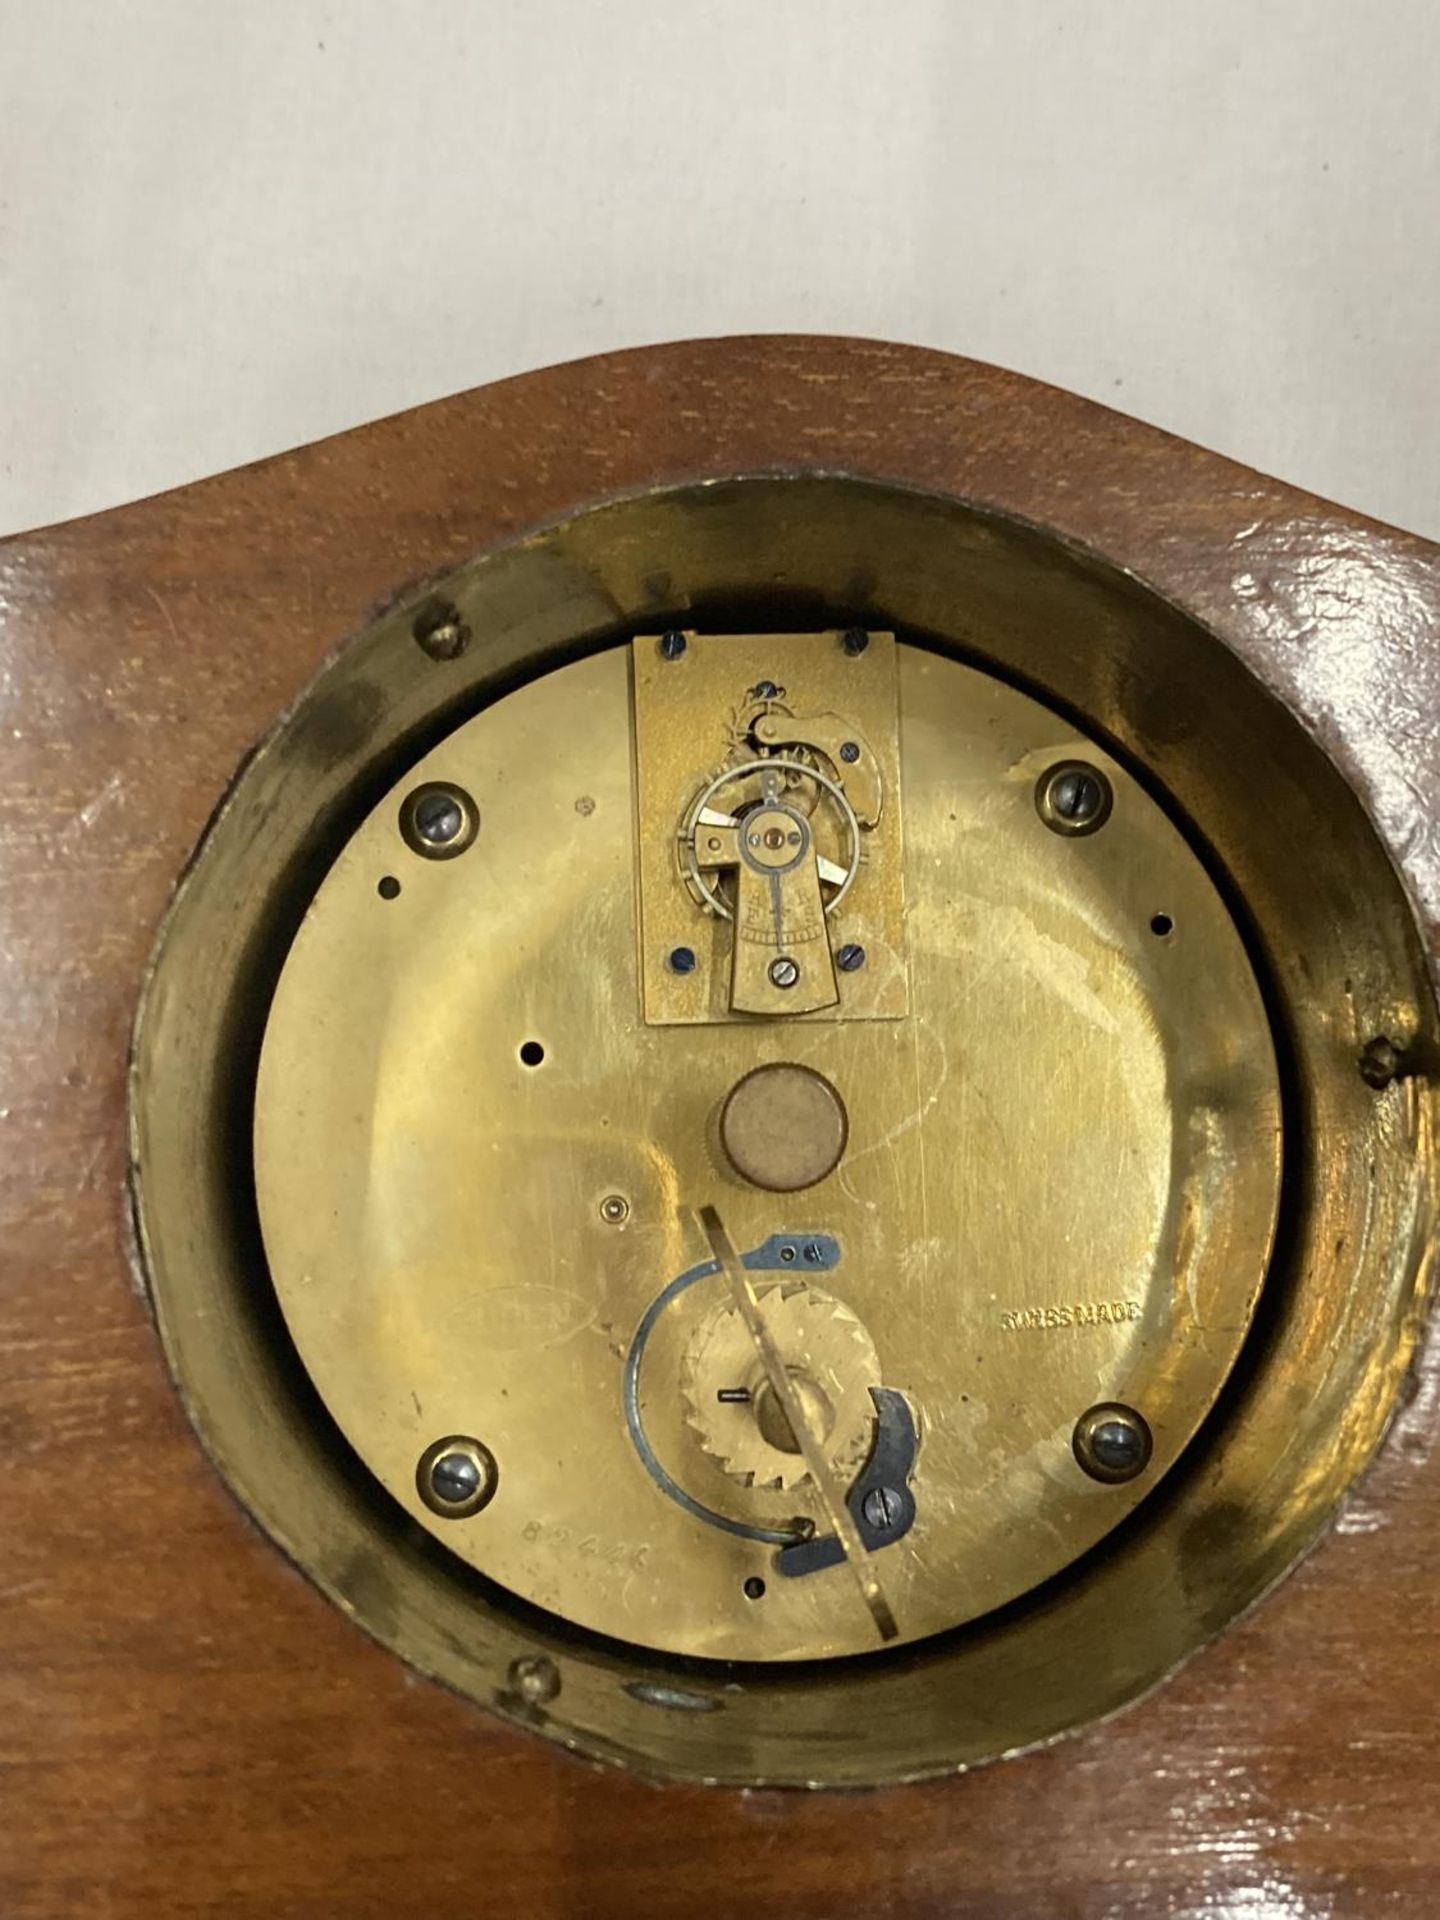 A SWISS MADE INLAID MANTLE CLOCK SEEN WORKING BUT NO WARRANTY - Image 4 of 5